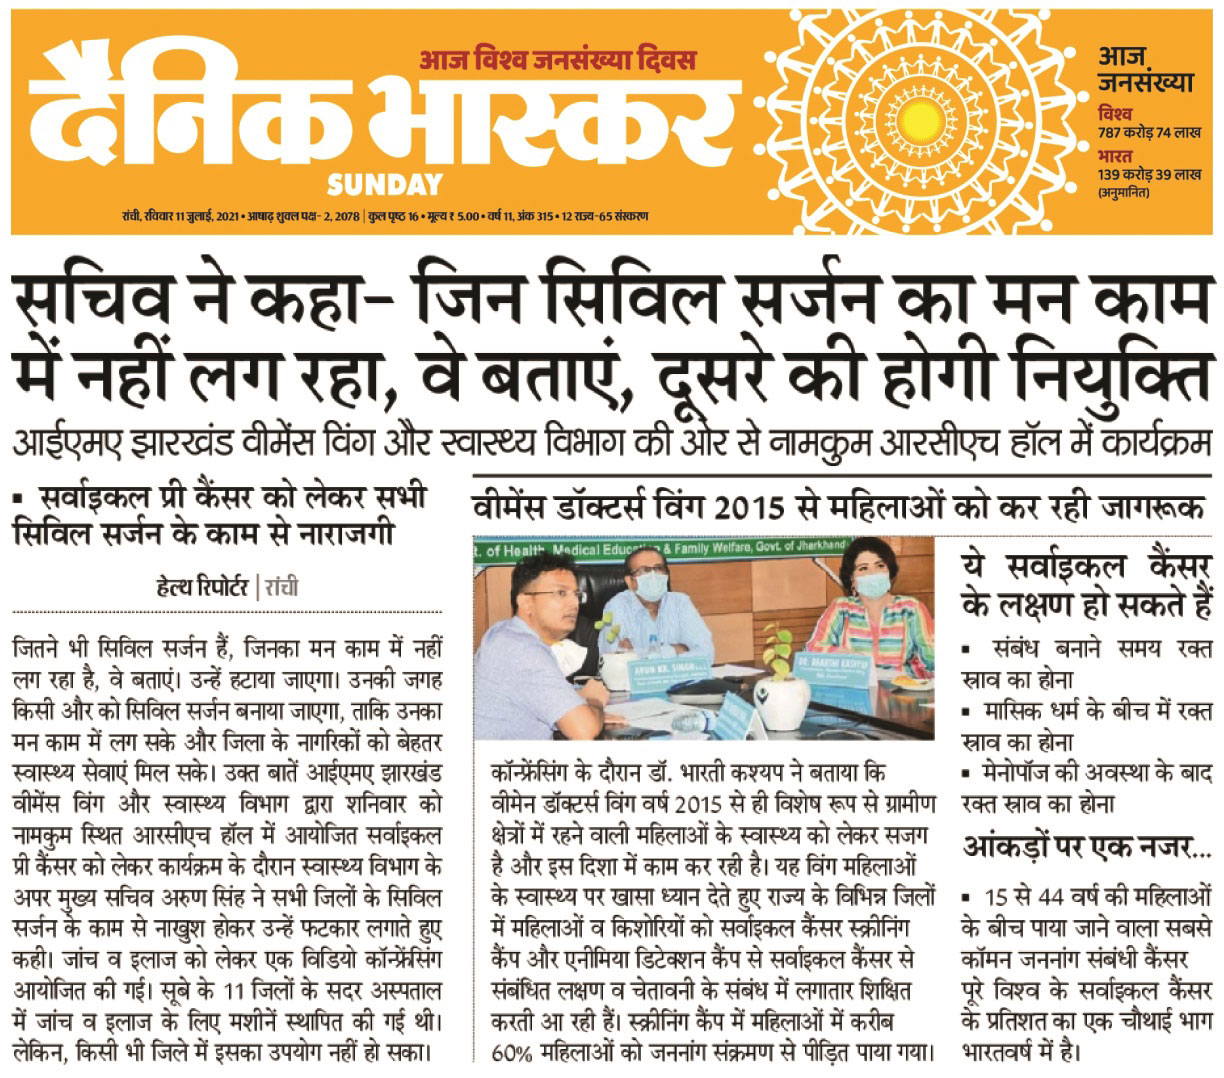 Jharkhand cervical cancer free state on 10th July 2021 at NRHM